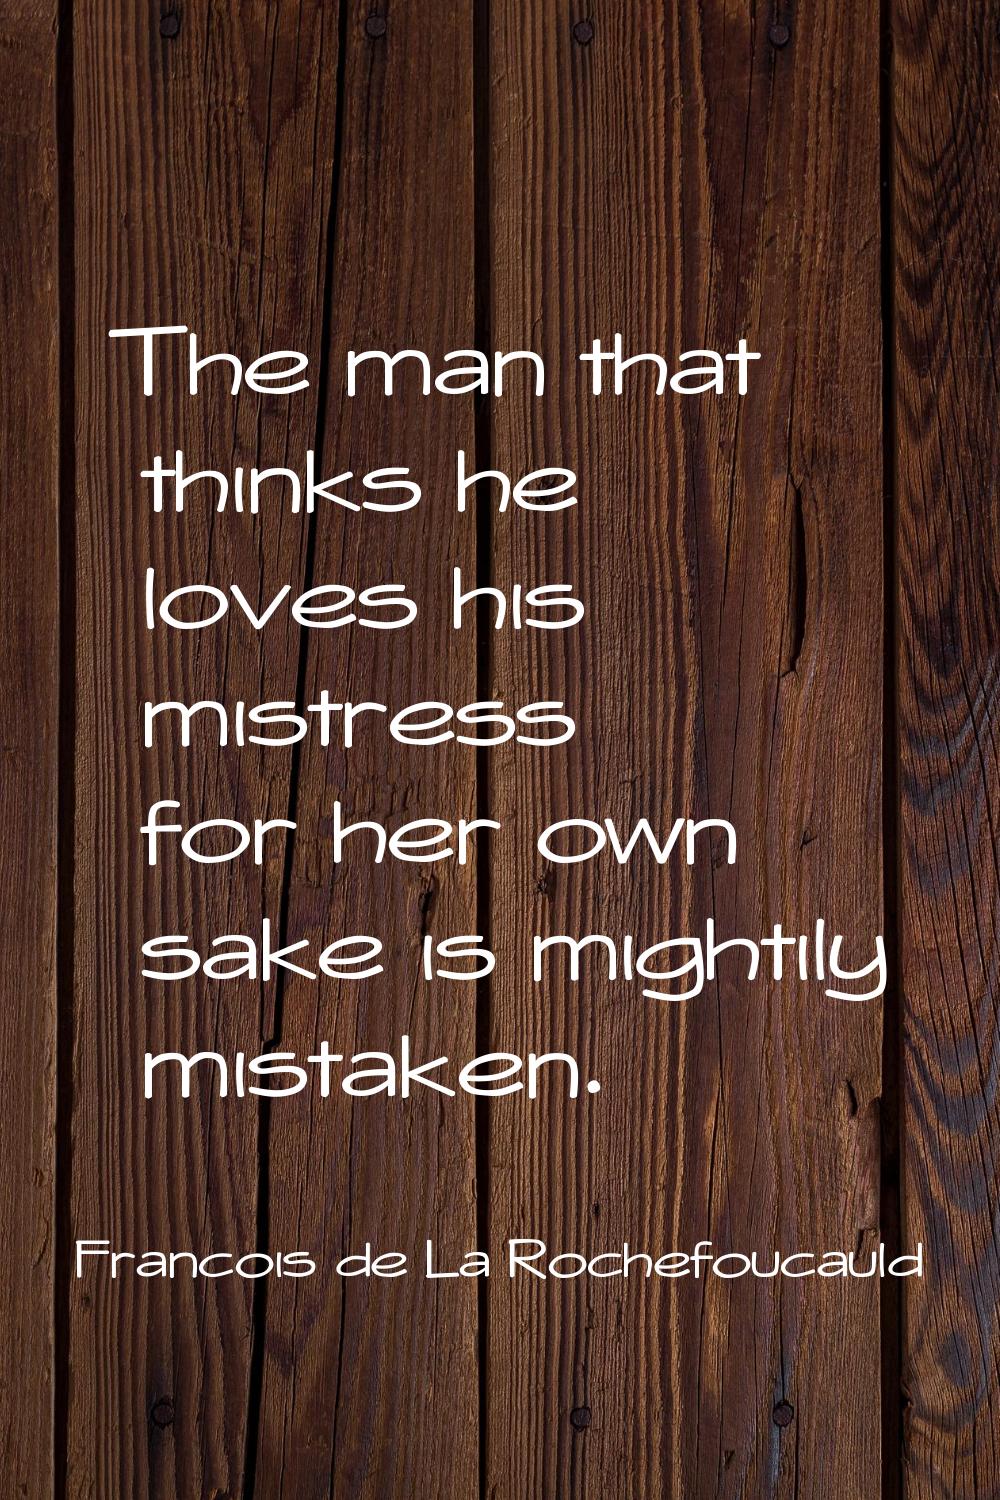 The man that thinks he loves his mistress for her own sake is mightily mistaken.